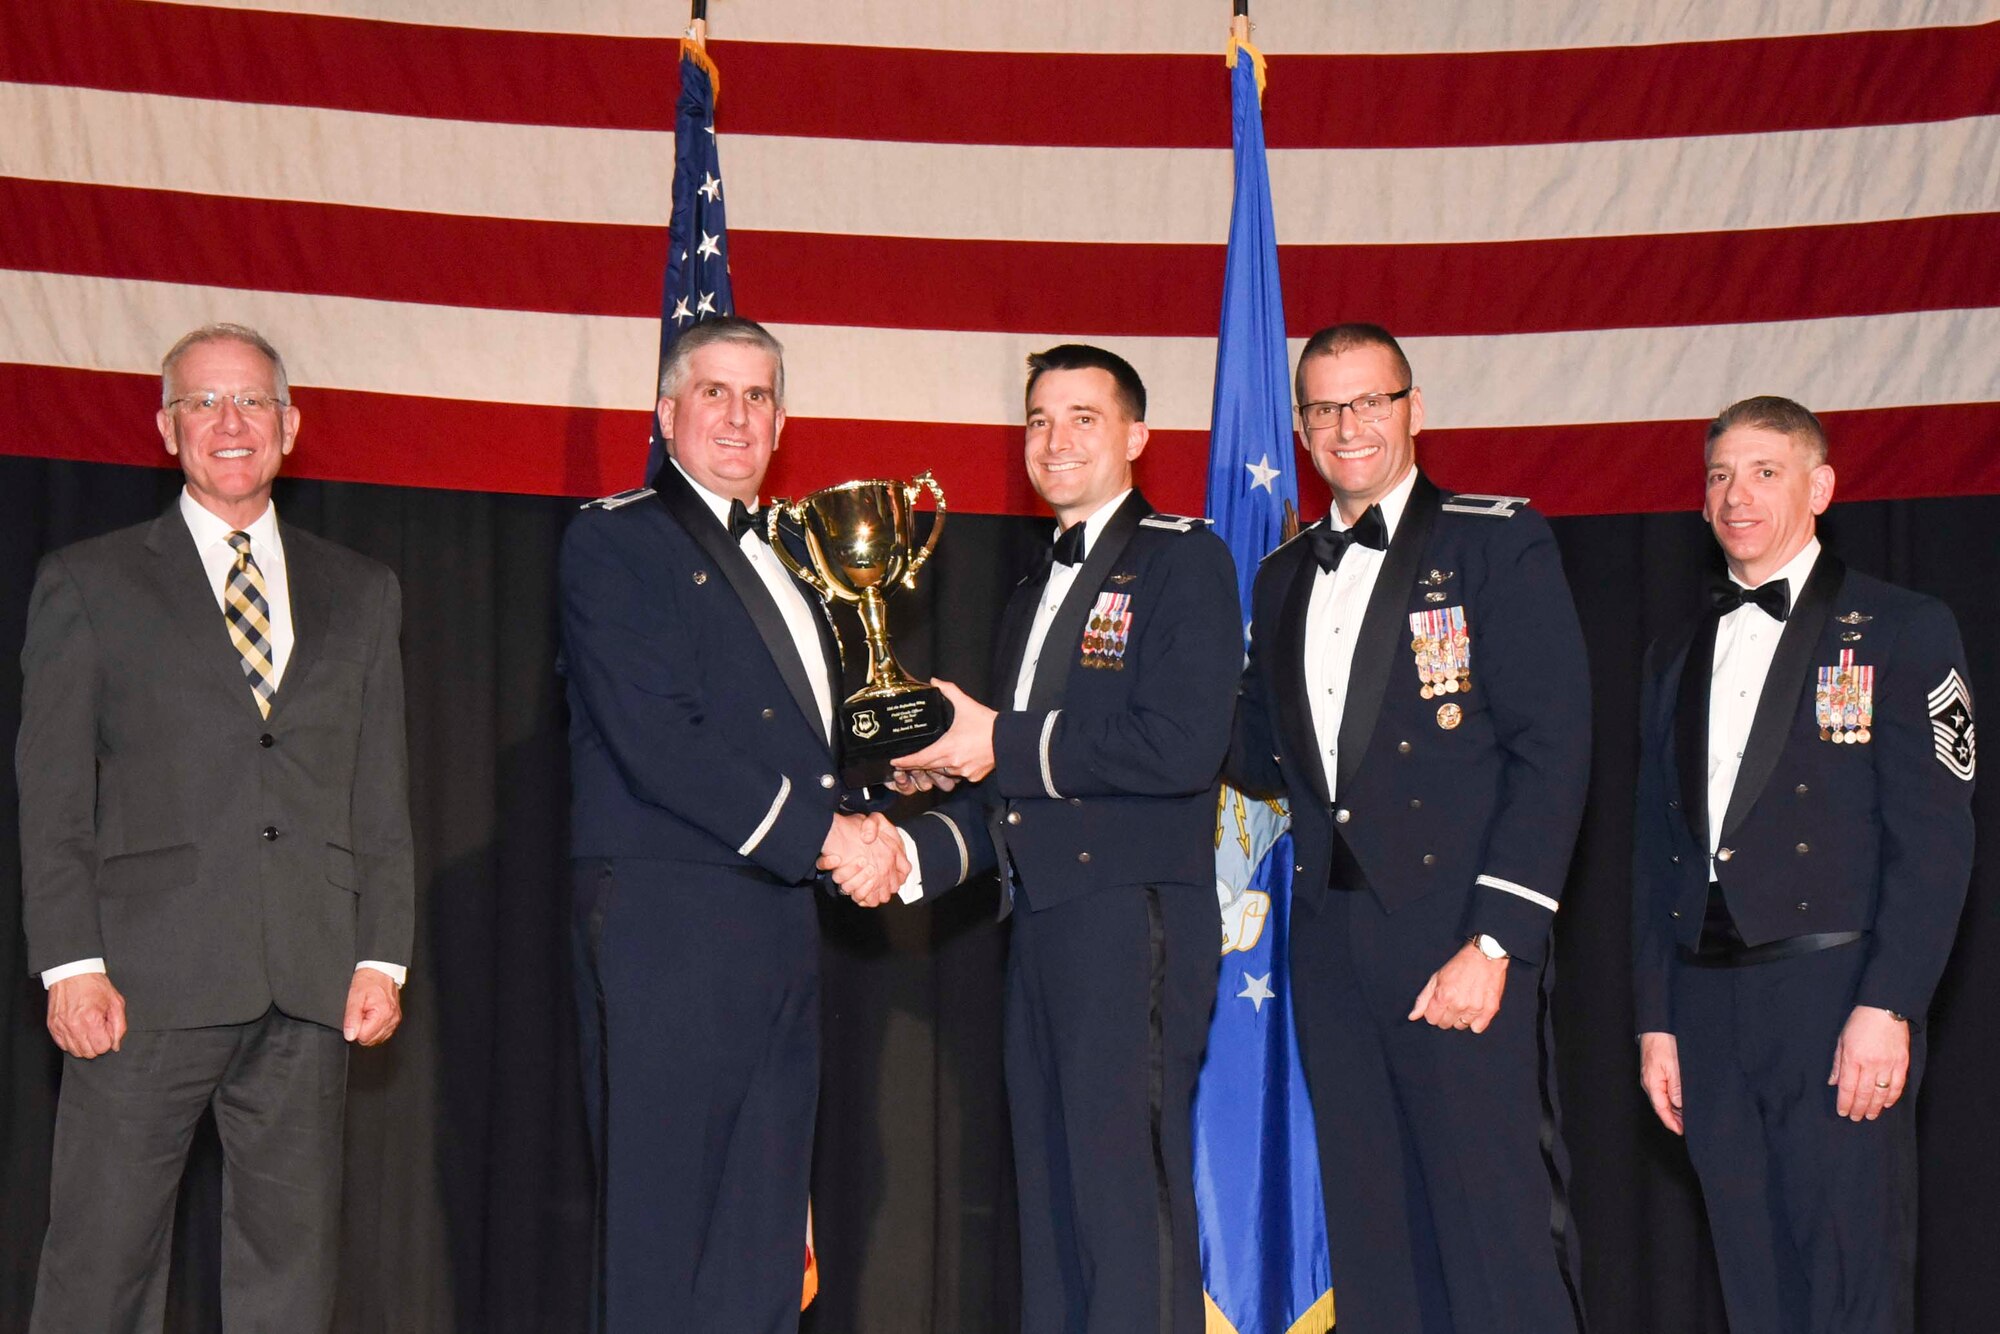 Lt. Col. Aaron Walenga, 22nd Operations Squadron commander, center, accepts the 2016 Field Grade Officer of the Year award on behalf of Maj. Jared R. Thomas, Feb. 3, 2017, at McConnell Air Force Base, Kan. The annual awards ceremony recognized military and civilian members who excel in their areas of responsibilities, leadership qualities, community involvement, self-improvement and innovation from January to December 2016. (U.S. Air Force photo/Senior Airman Christopher Thornbury)